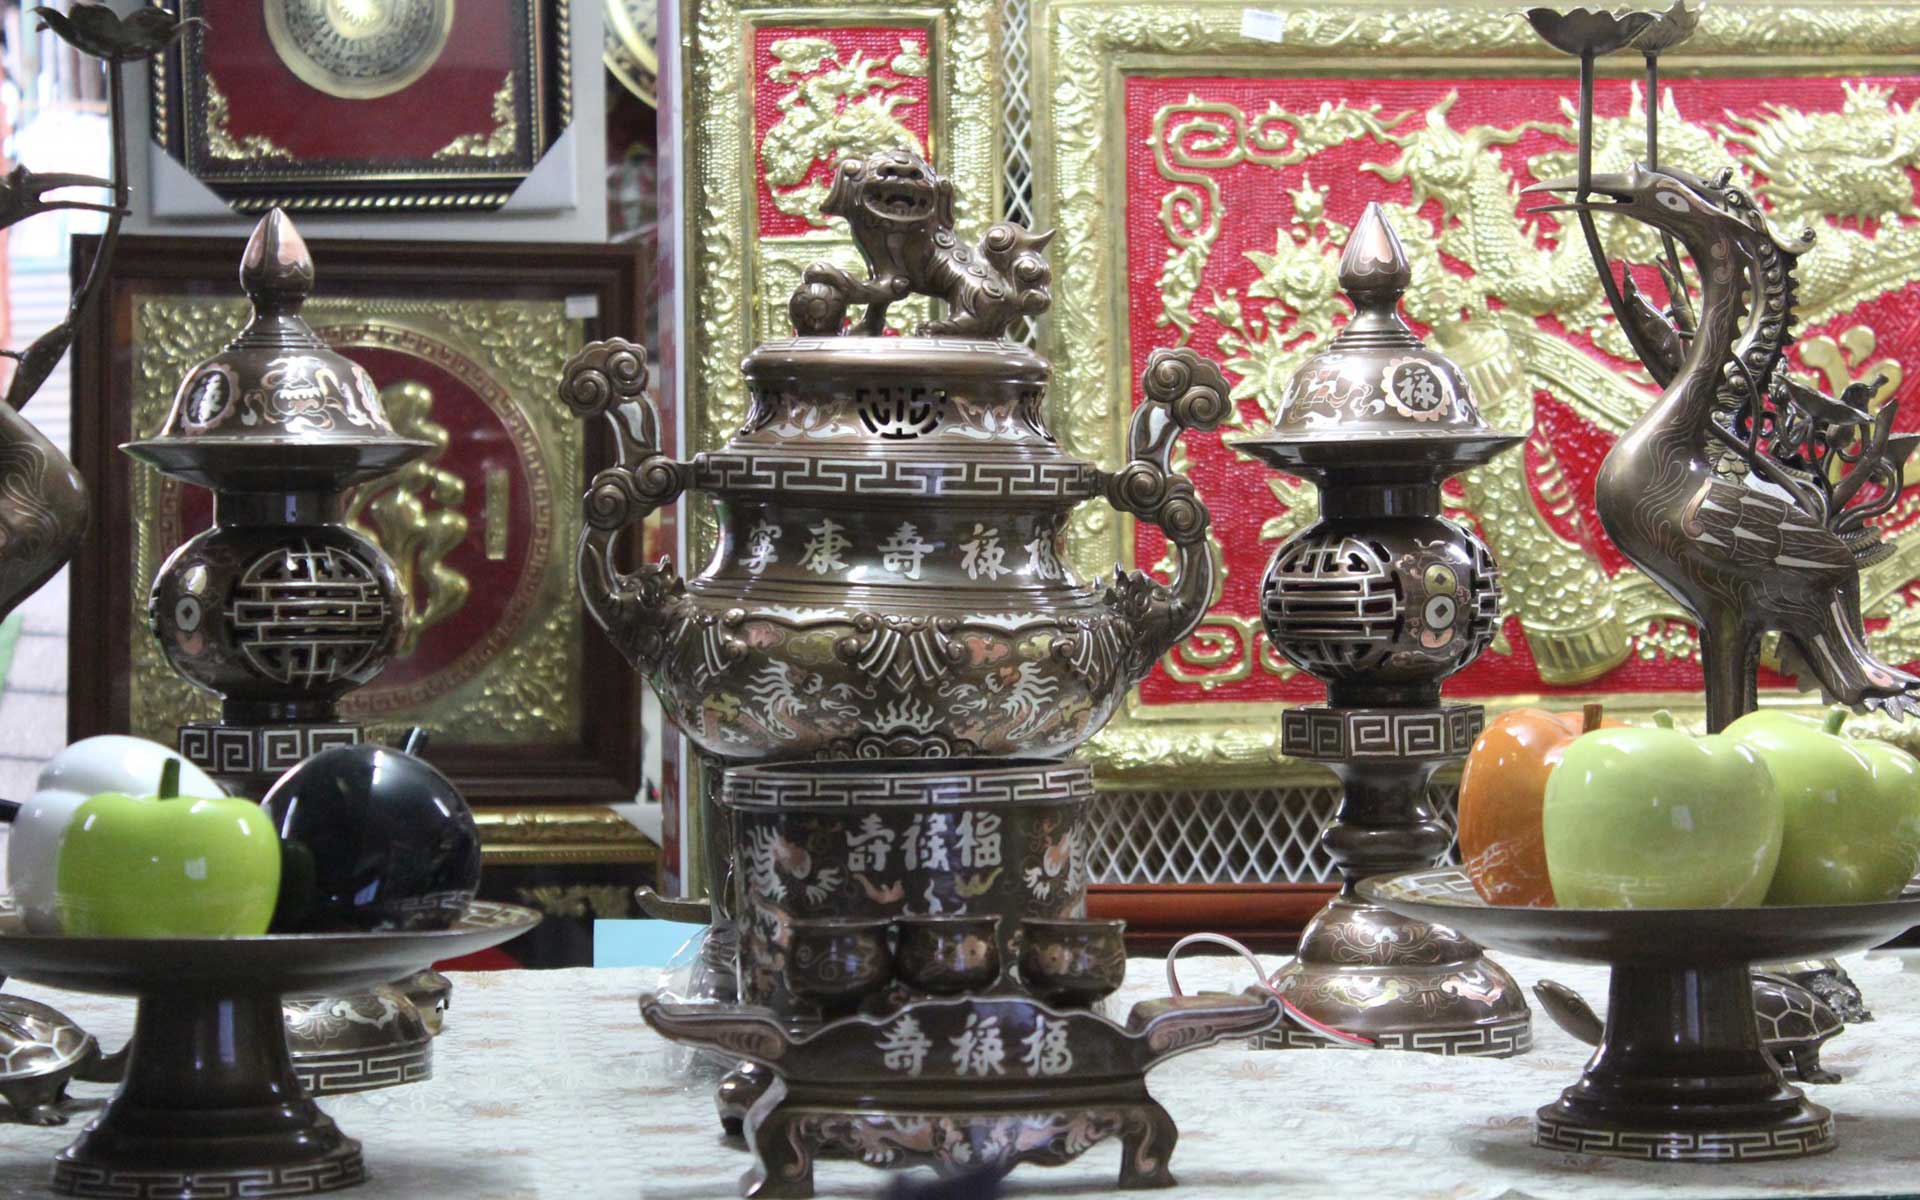 The various products from Dai Bai bronze village